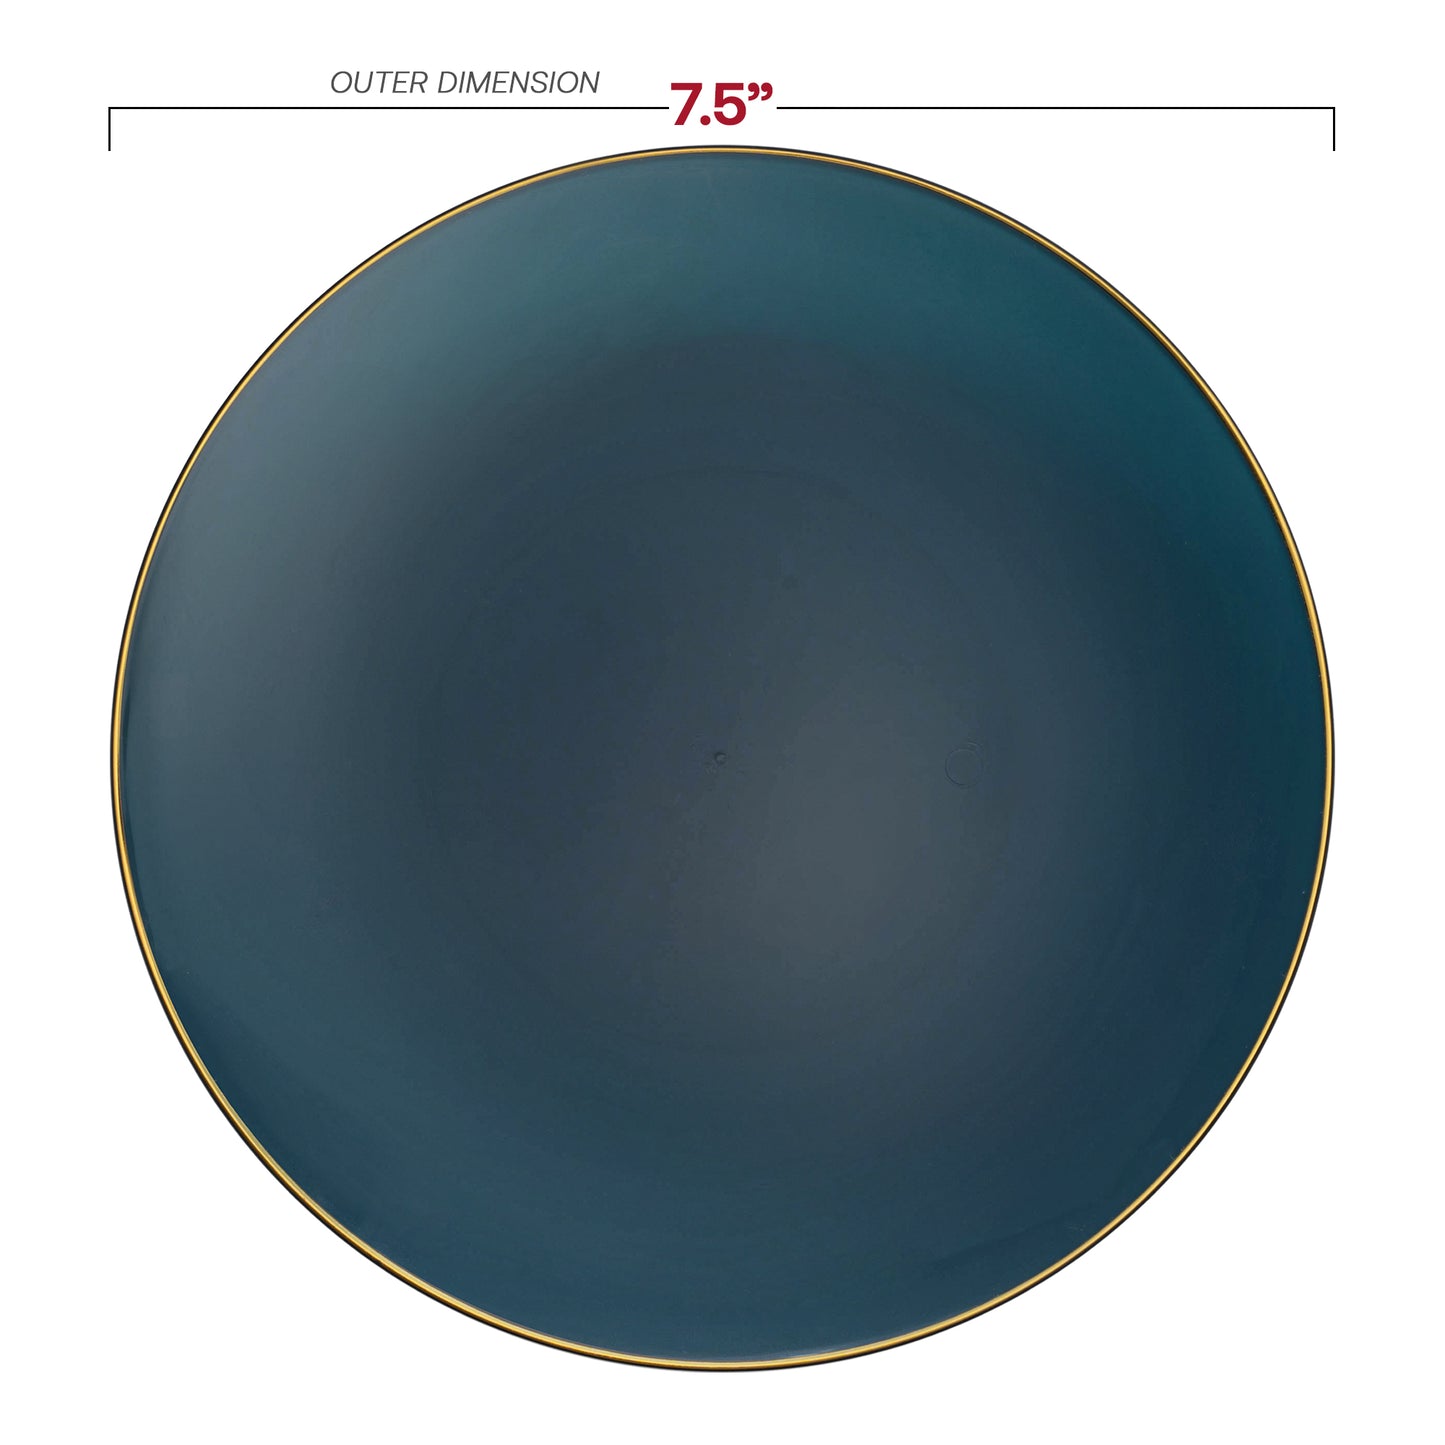 Navy with Gold Rim Organic Round Disposable Plastic Salad Plates (7.5") Dimension | The Kaya Collection